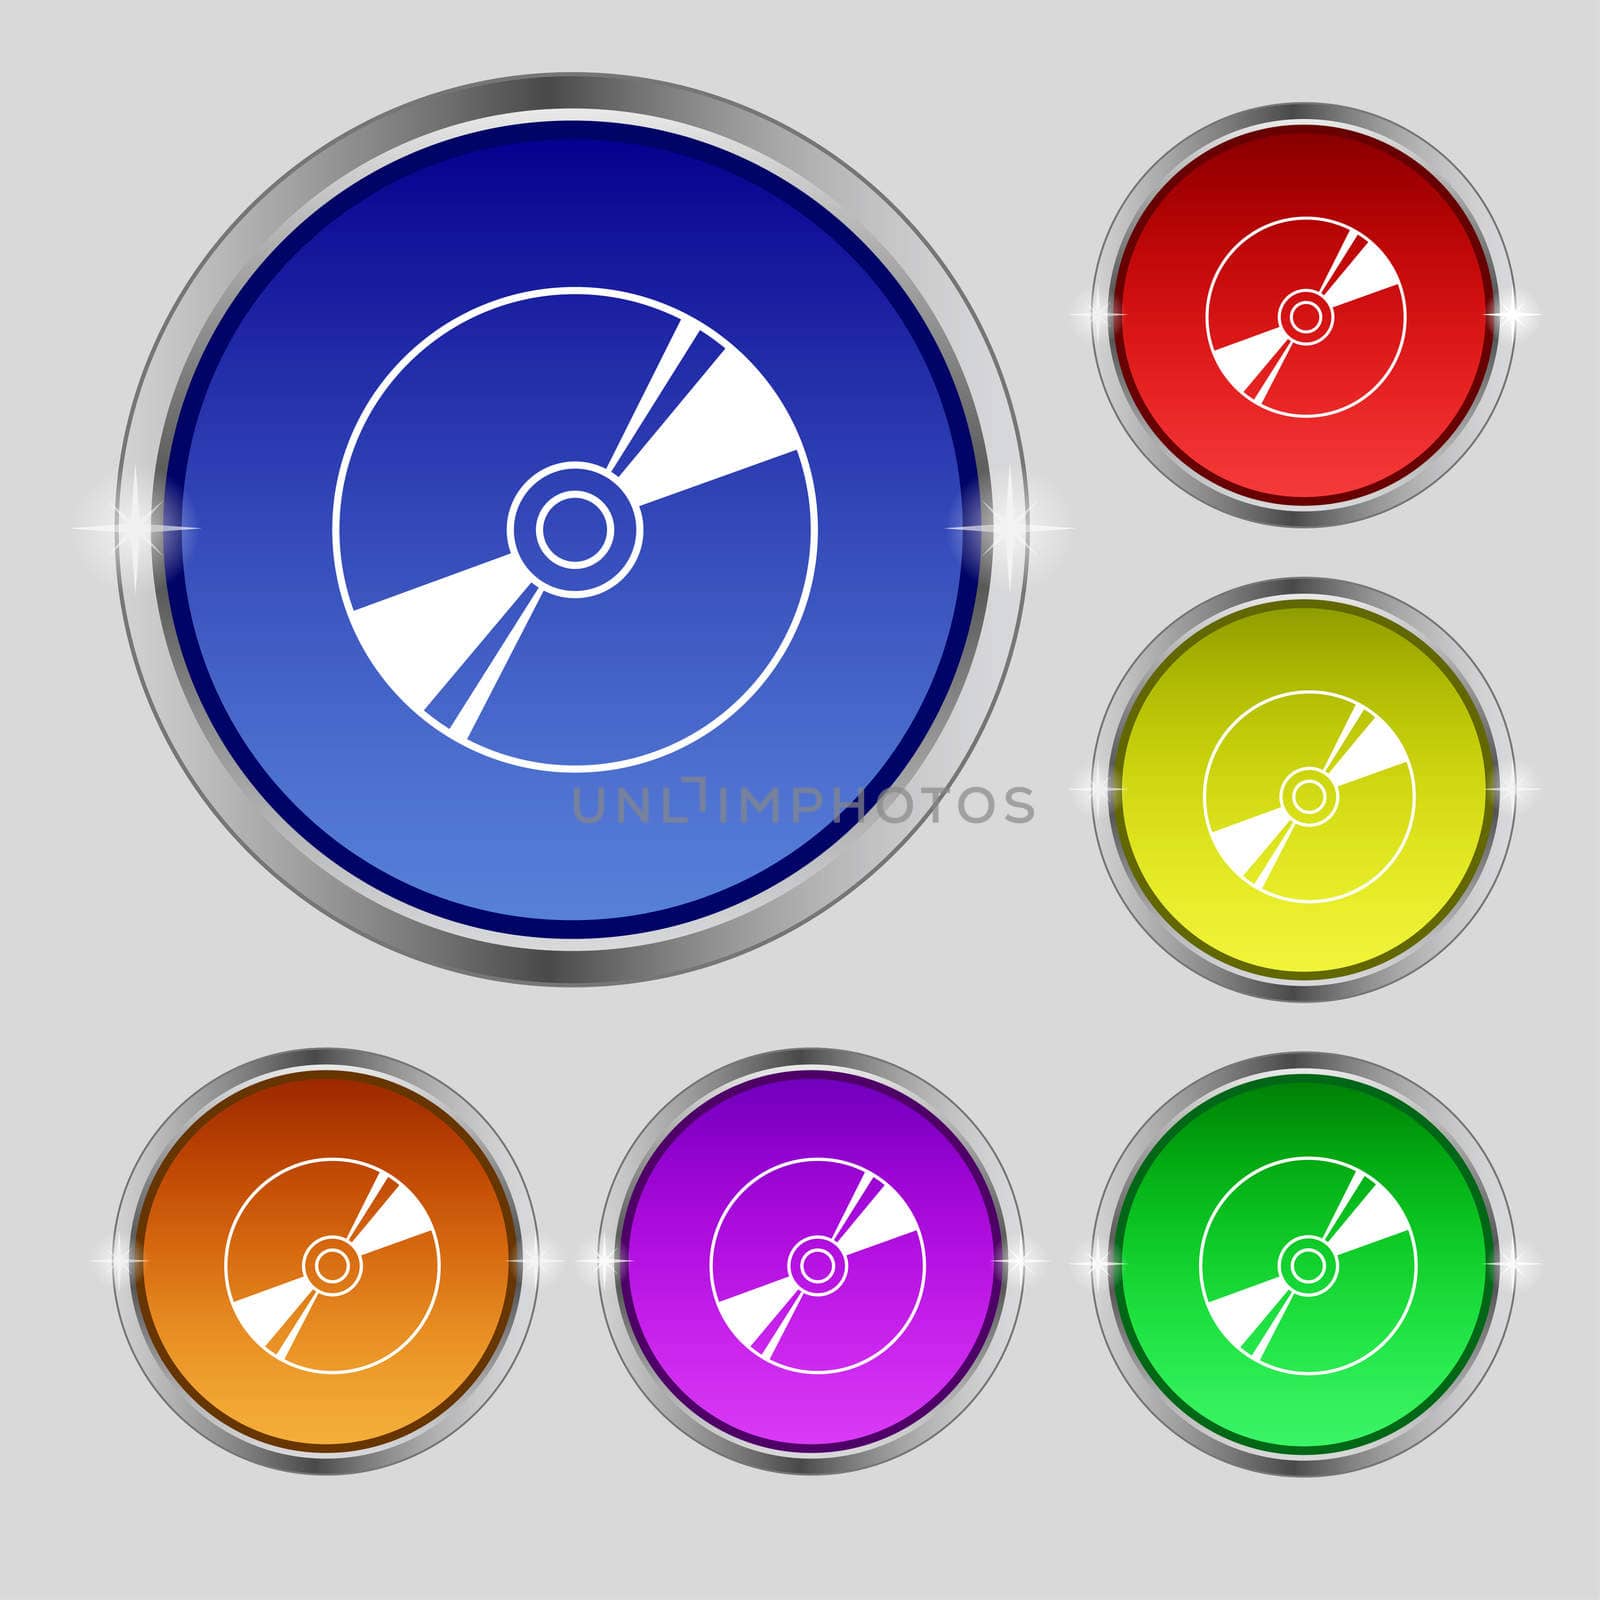 Cd, DVD, compact disk, blue ray icon sign. Round symbol on bright colourful buttons. illustration